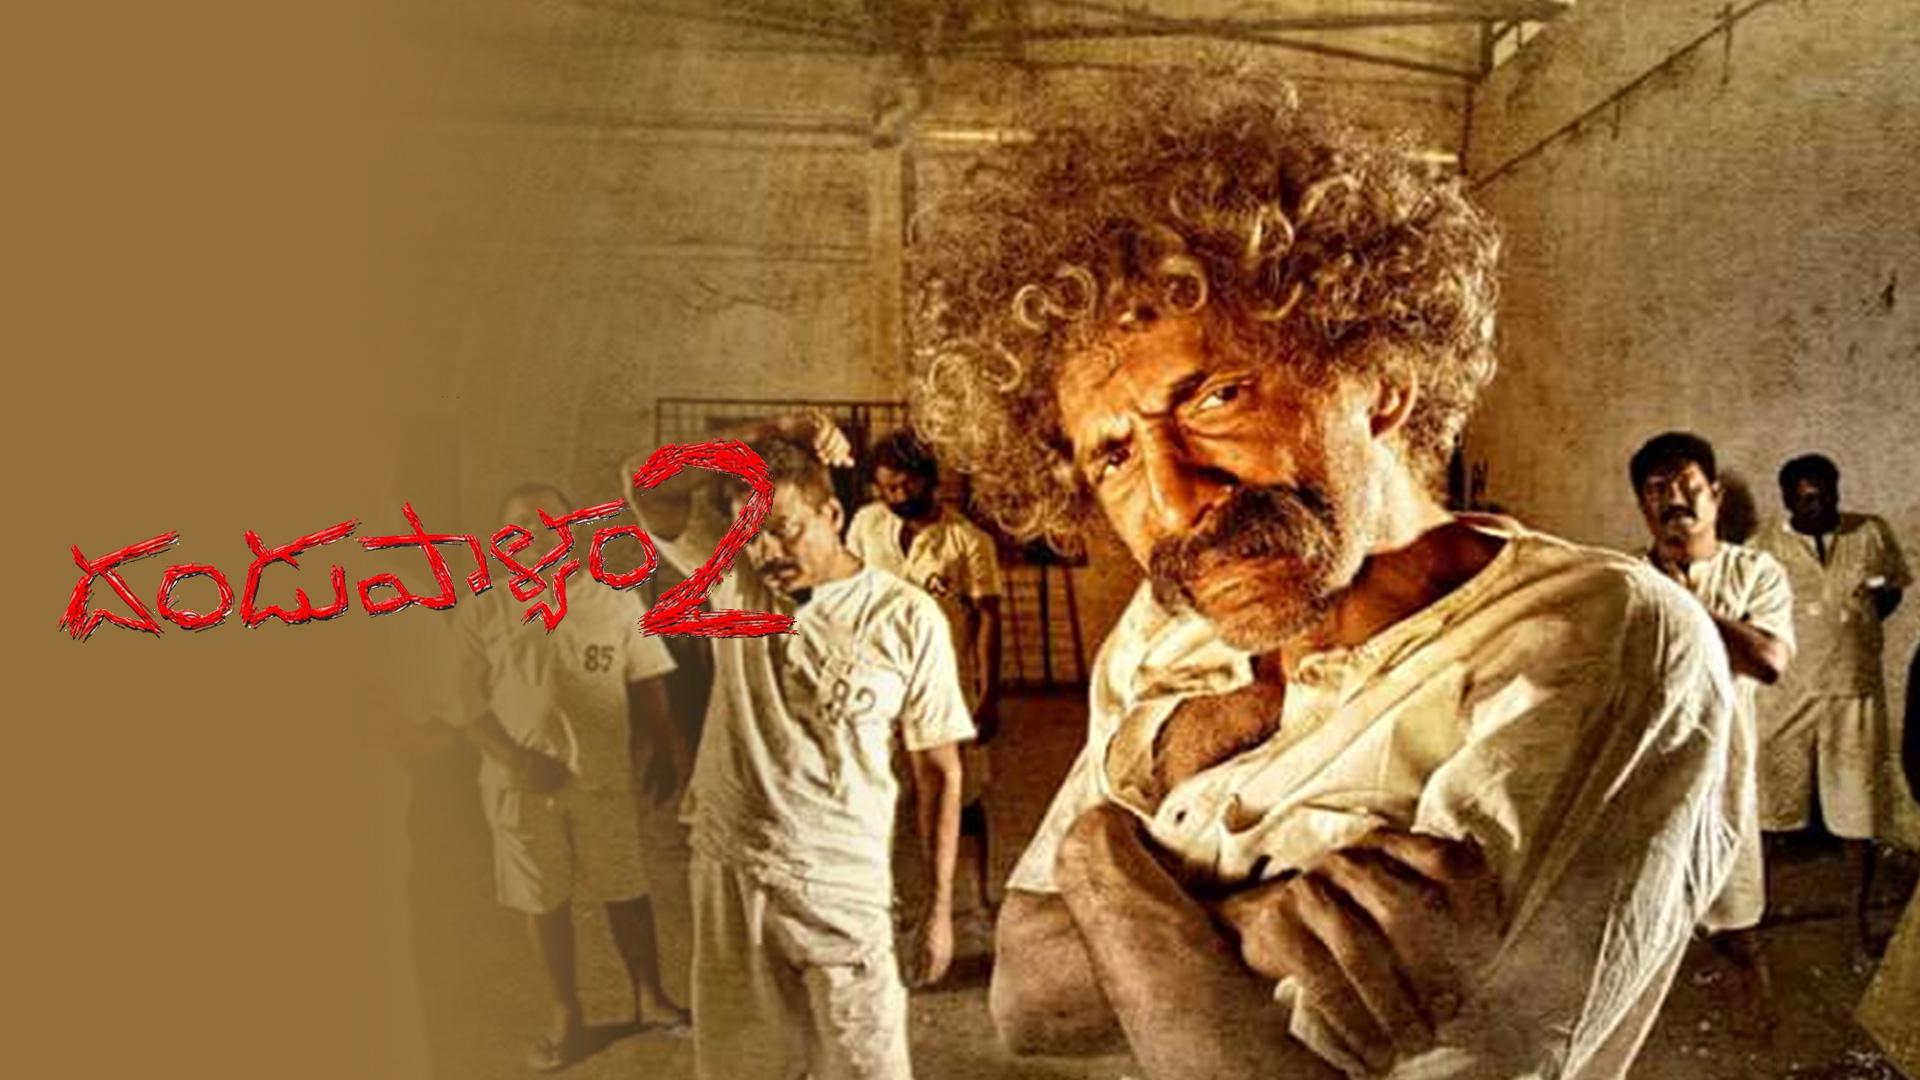 baanu couture recommends dandupalya 2 movie online pic